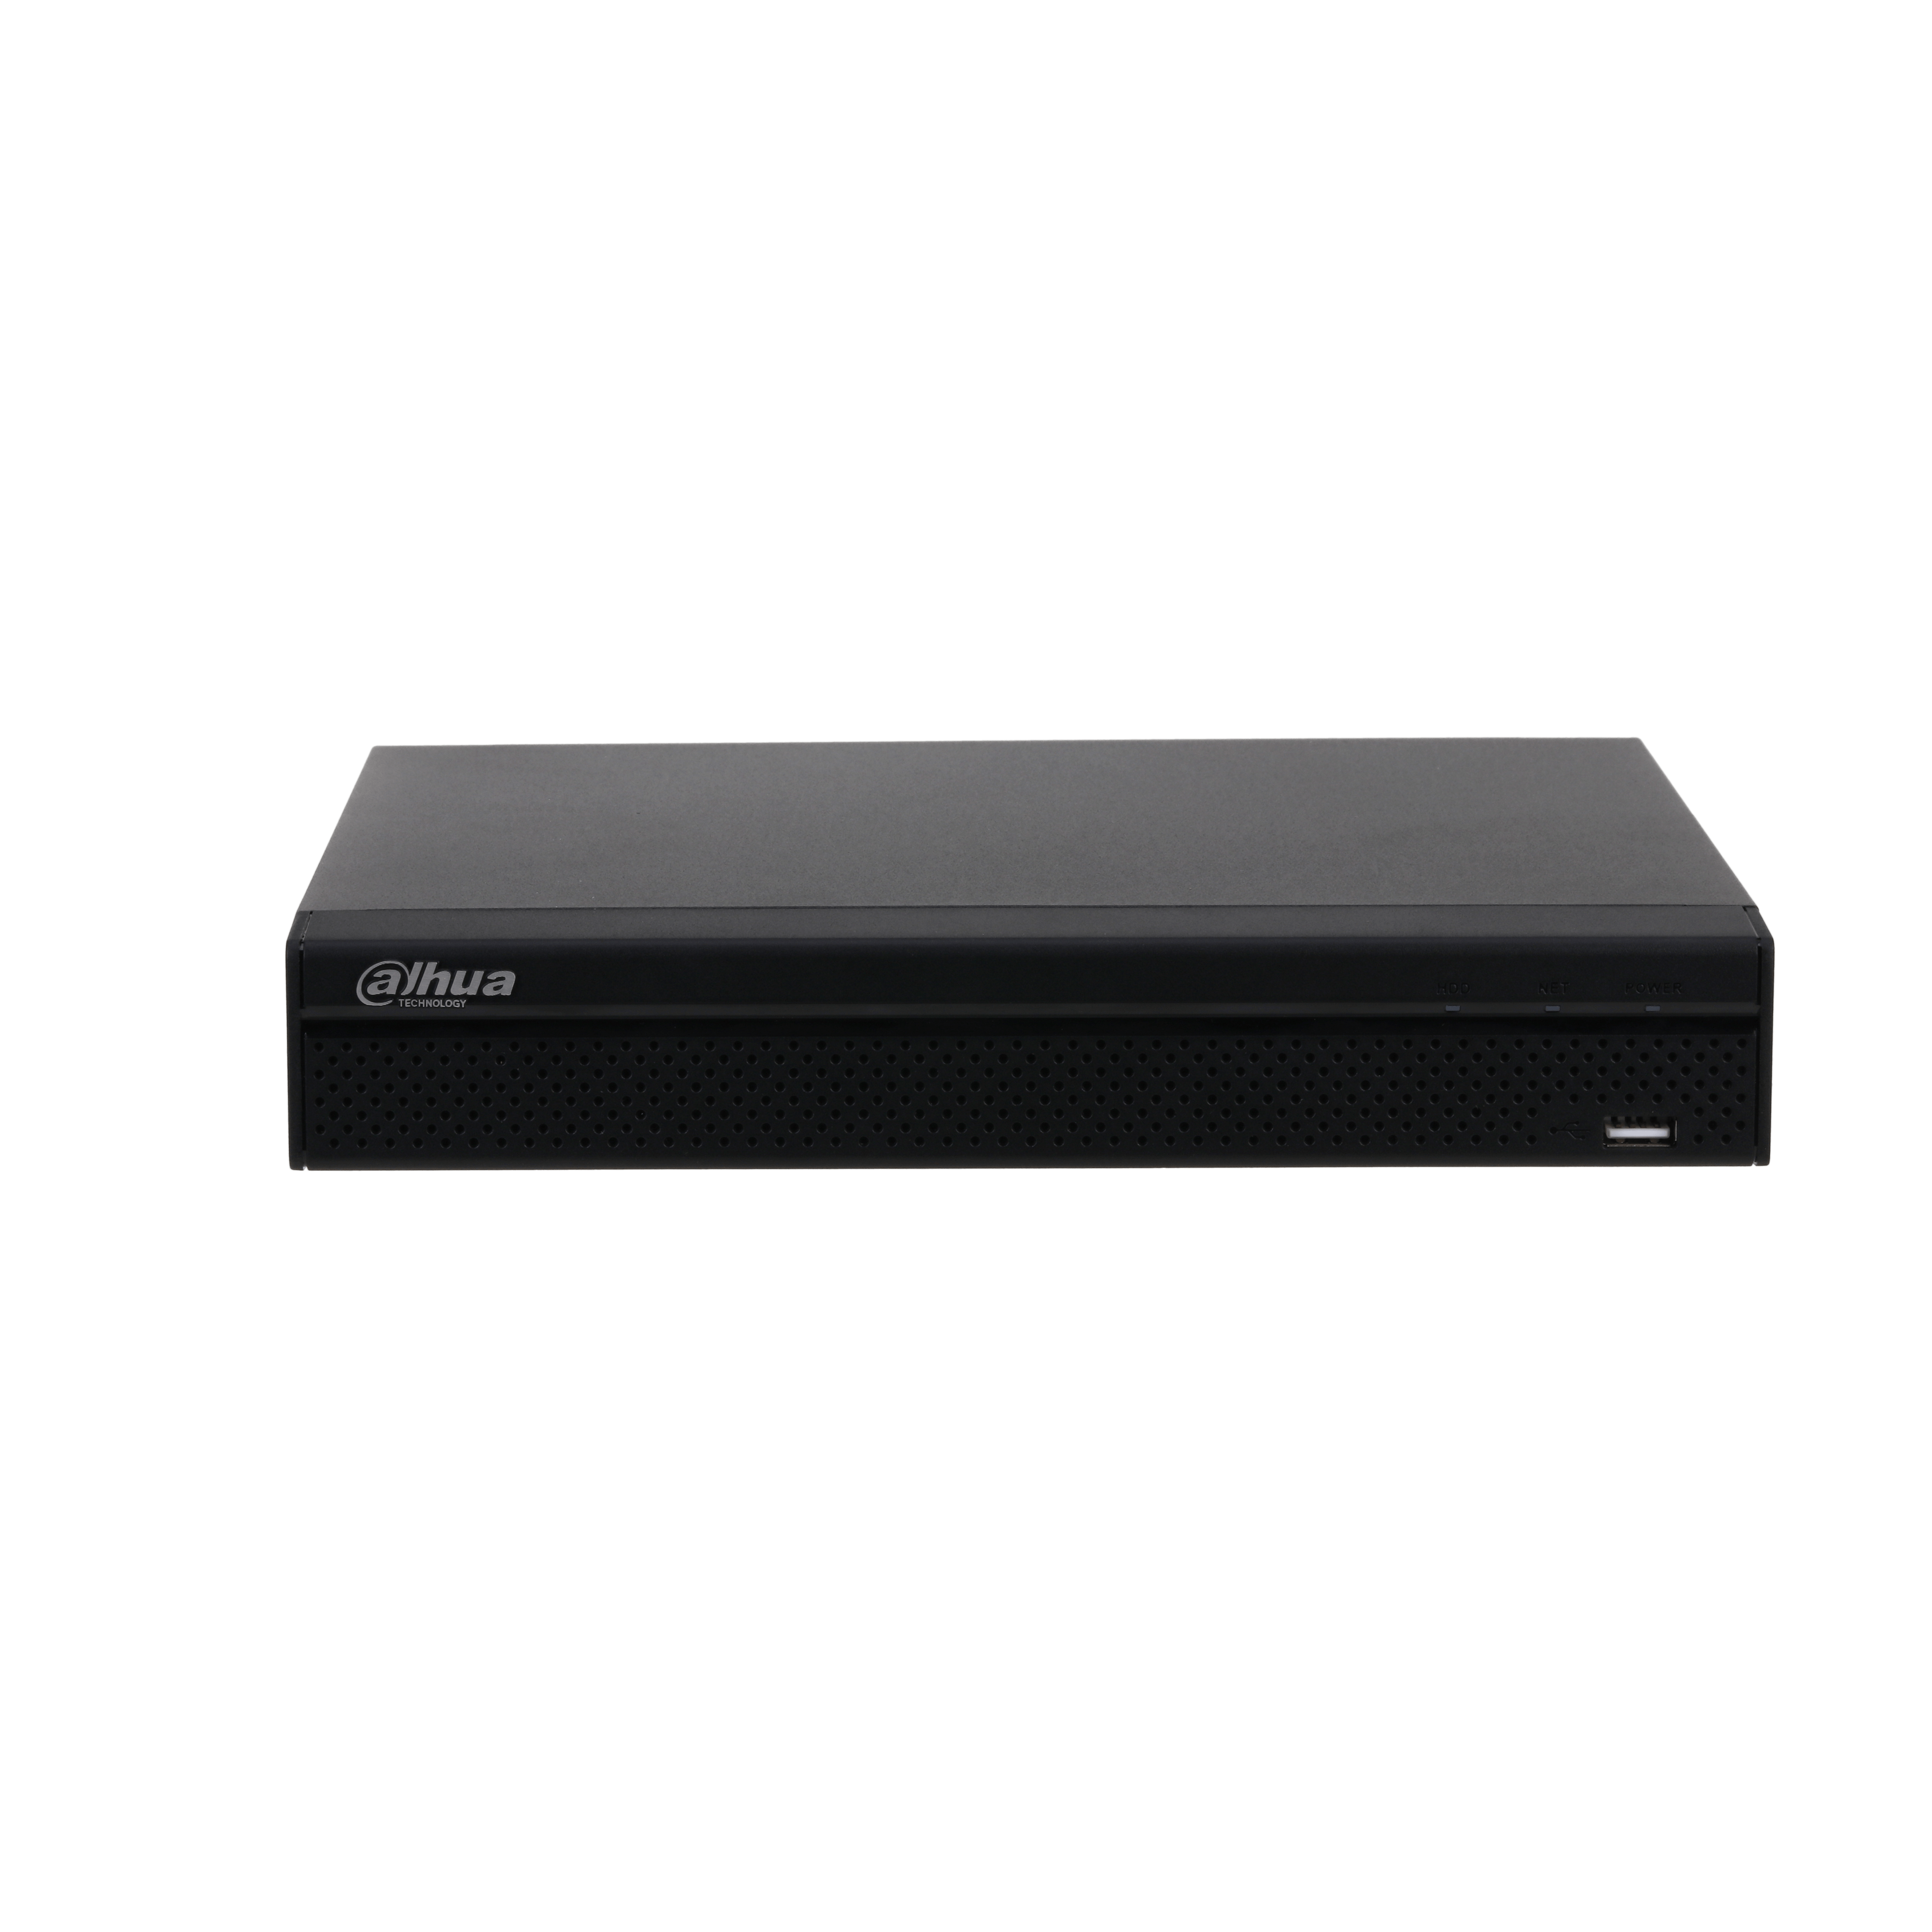 DHI-NVR4108HS-8P-4KS2/L - Dahua - 8 Channel Compact 1HDD 1U 8PoE Network Video Recorder